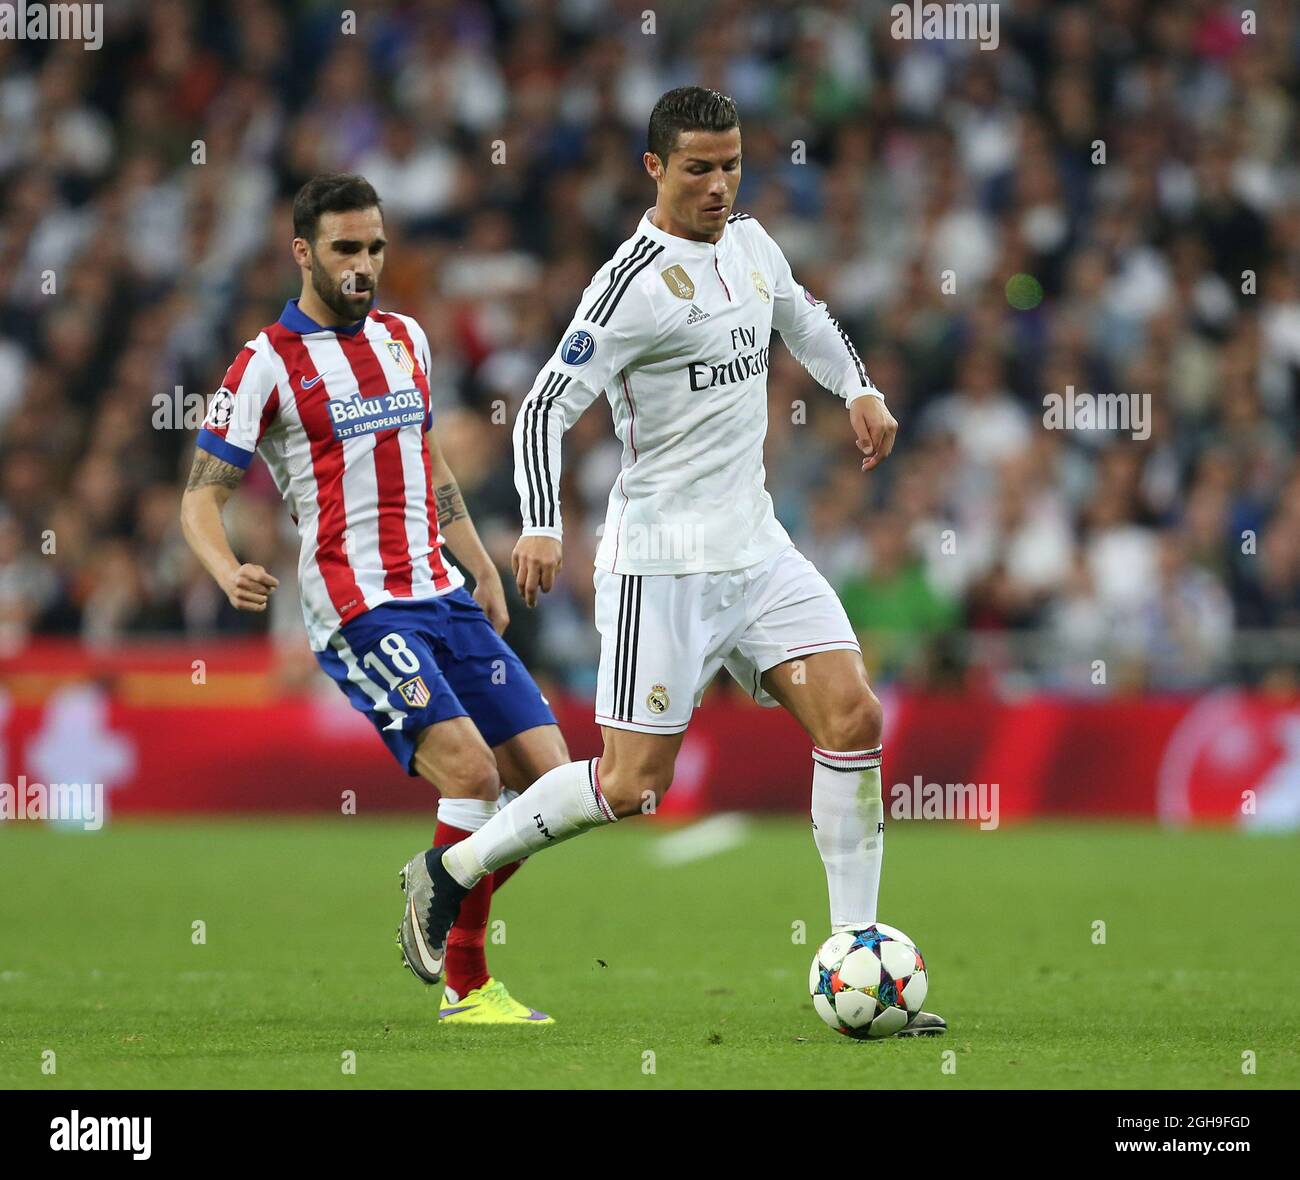 Jesus Gamez of Atletico and Cristiano Ronaldo of Real Madrid inaction  during UEFA Champions League Quarter Final Second Leg match between Real  Madrid and Atletico Madrid at Santiago Bernabeu, Spain on April